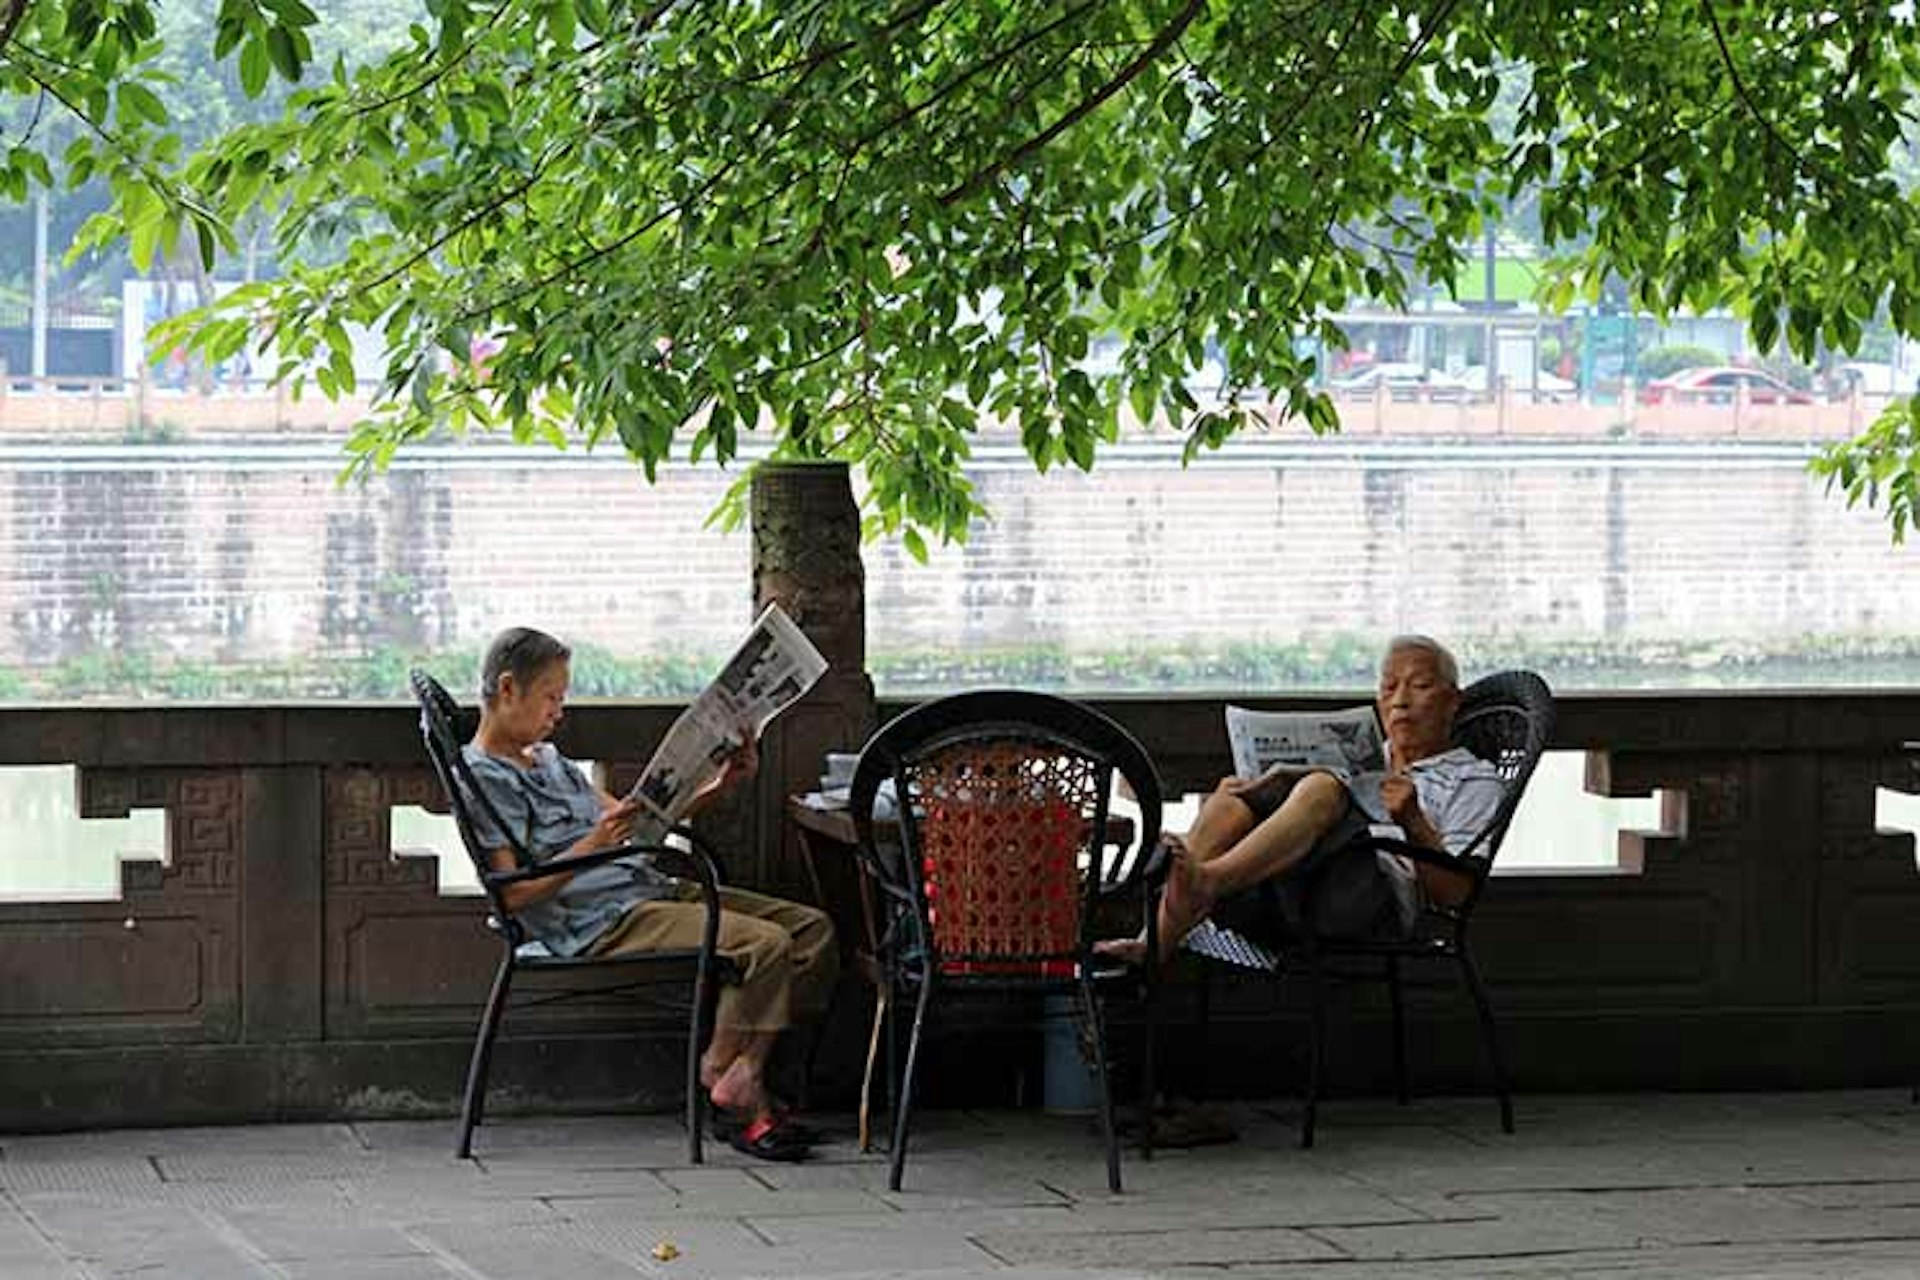 Leisurely afternoon at Baitanyuan. Image by Qin Xie / Lonely Planet